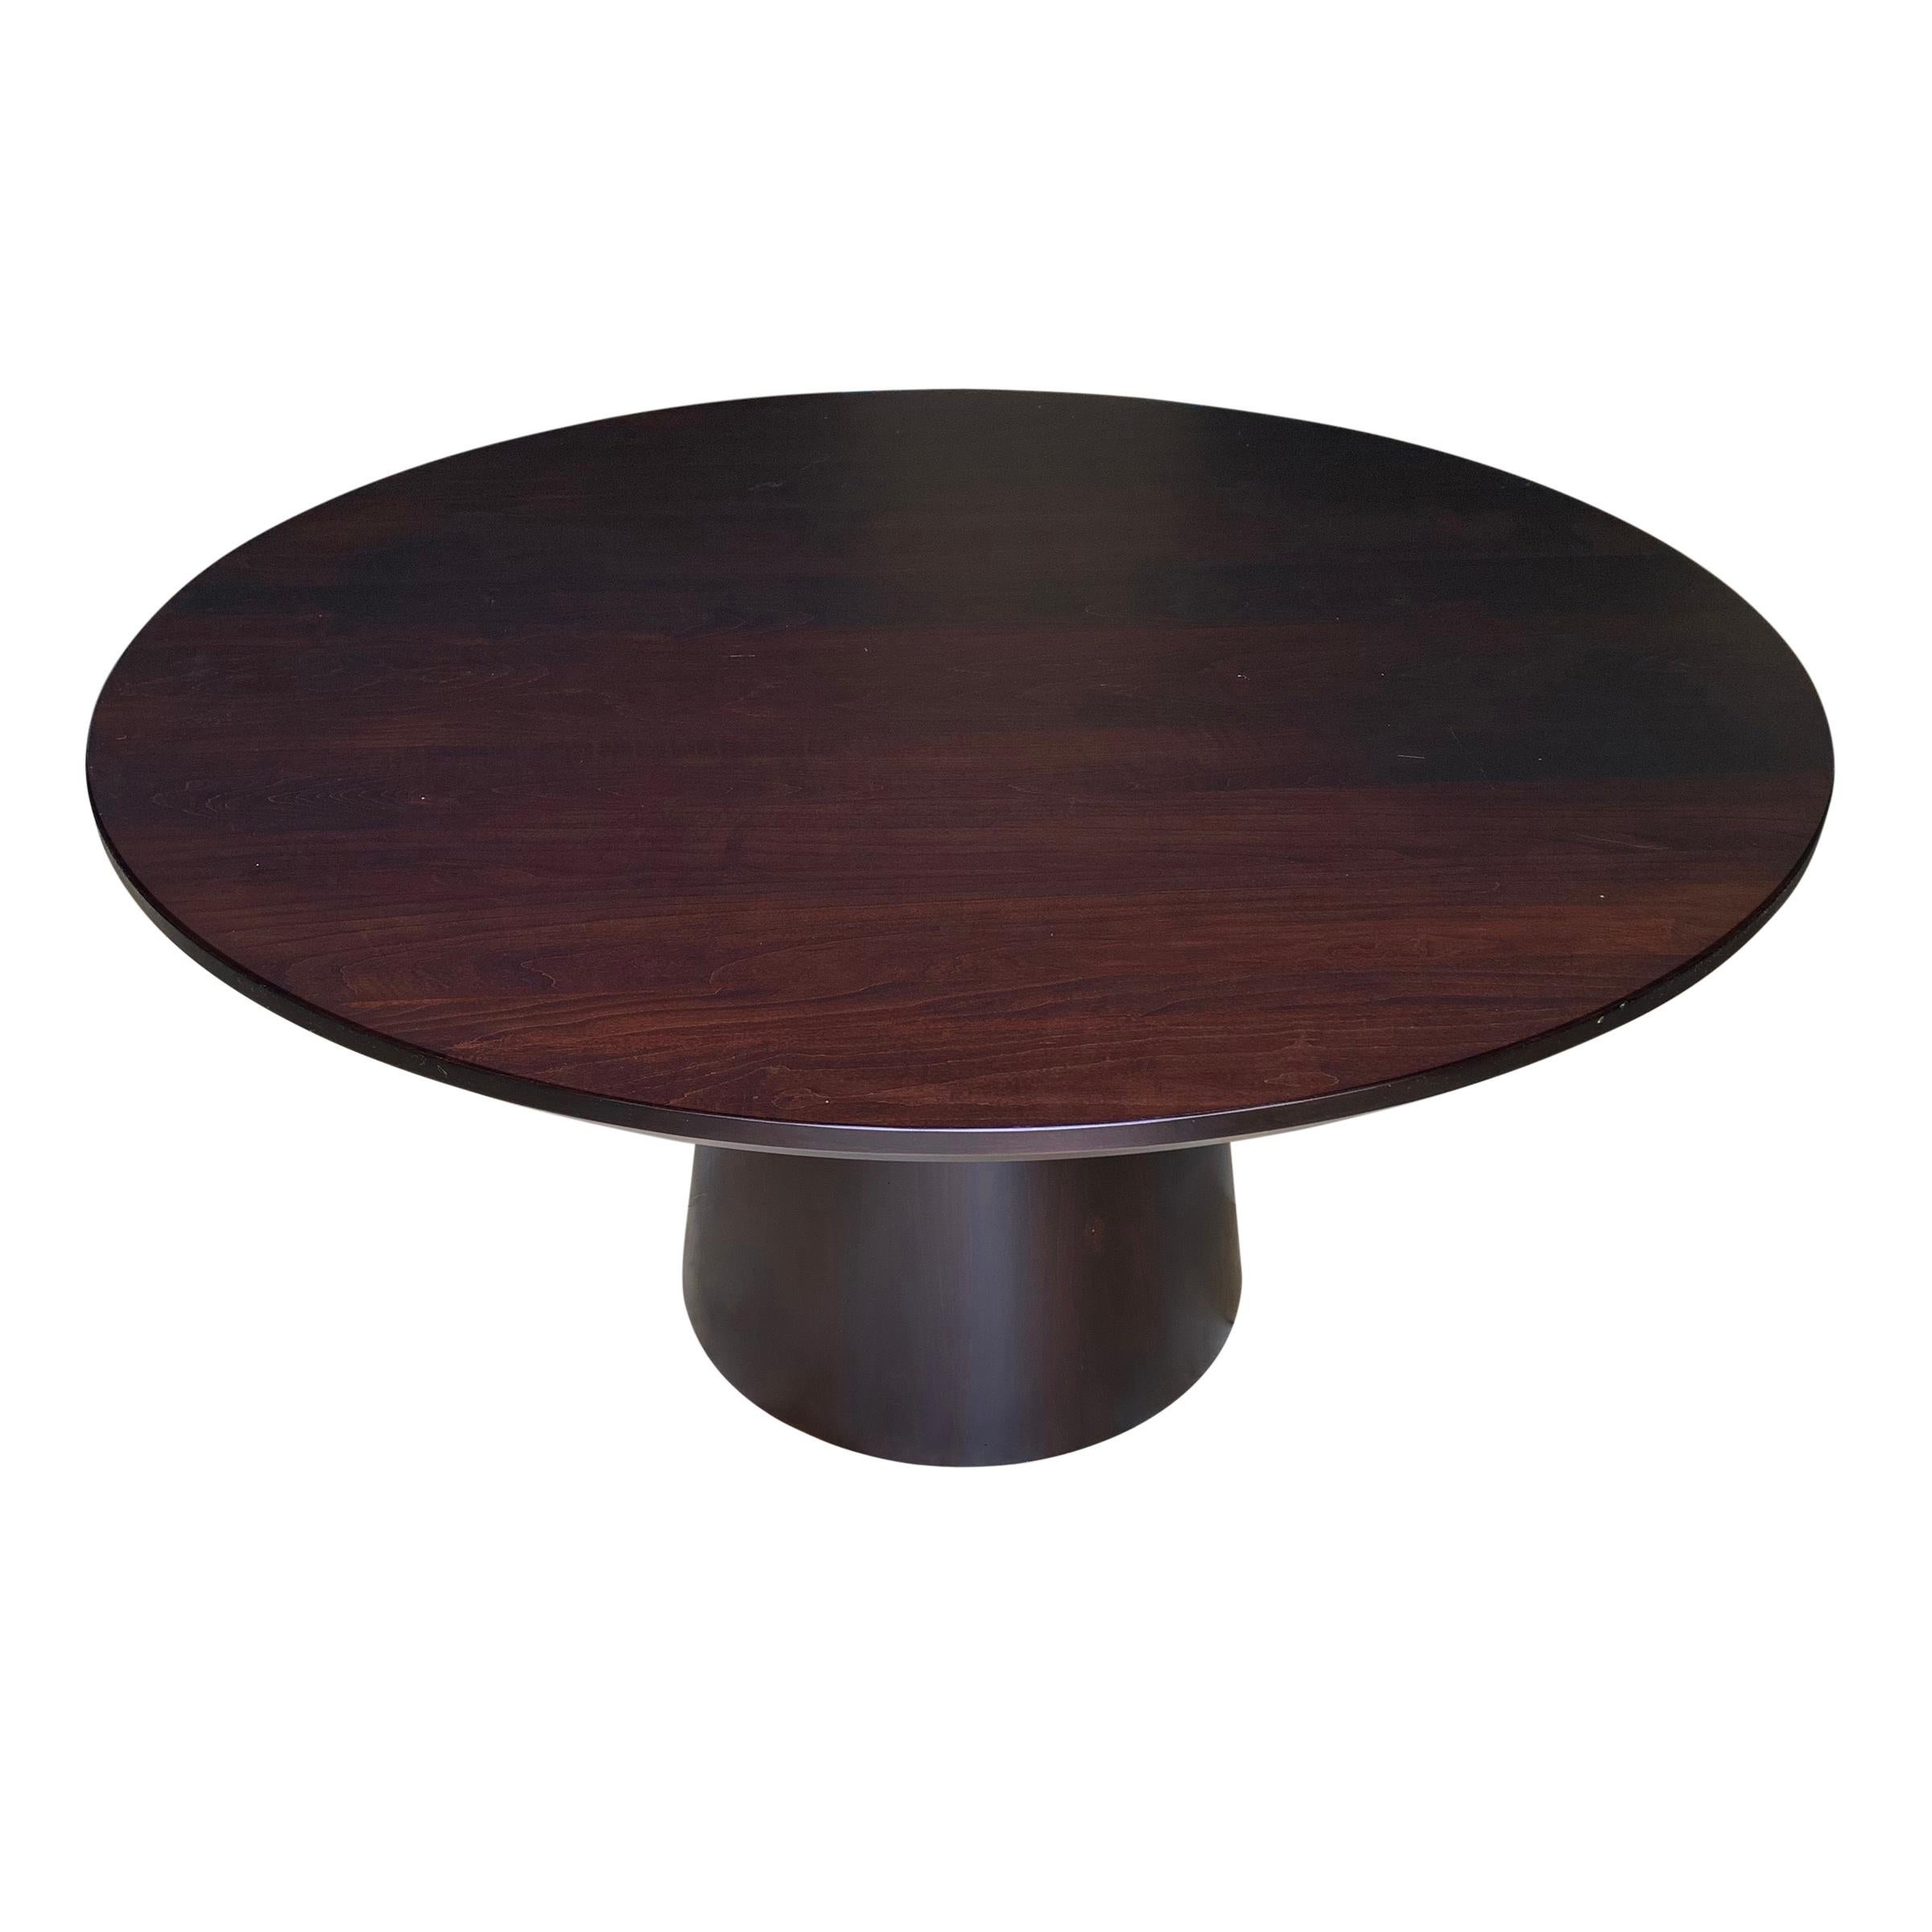 An incredible contemporary pine pedestal dining table with a tapered base, a beveled edge top, and a dull matte finish. There are natural 